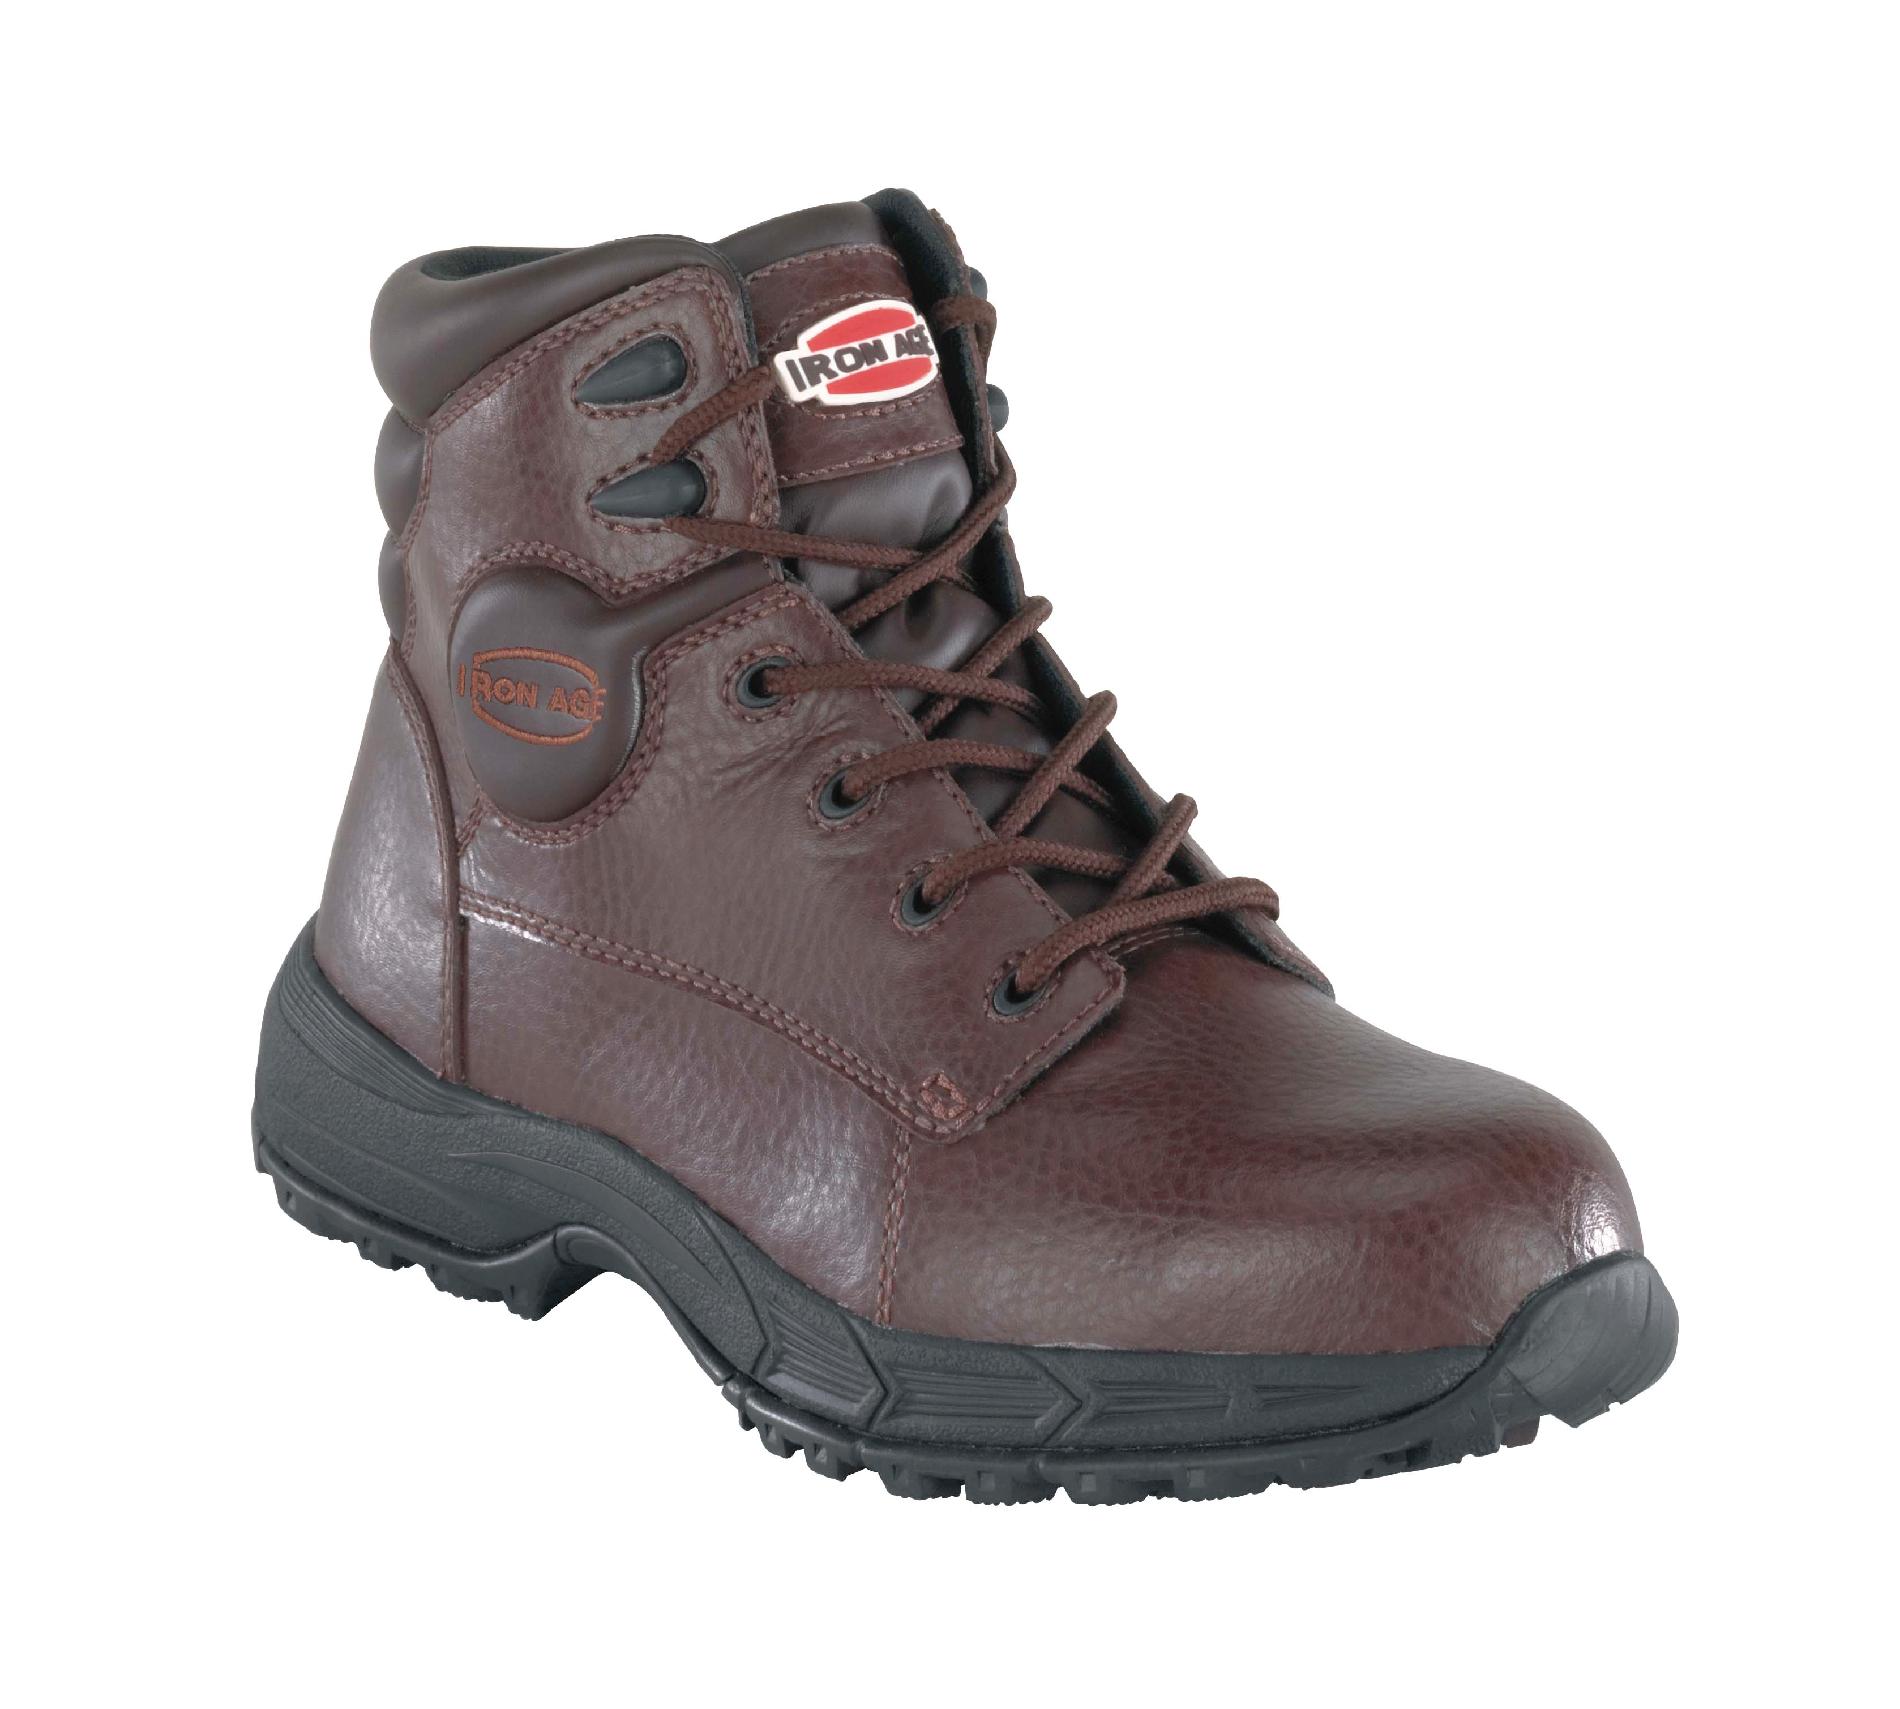 Iron Age Men's Brown Ground Finish 6 Inch Steel Toe Sport Boot